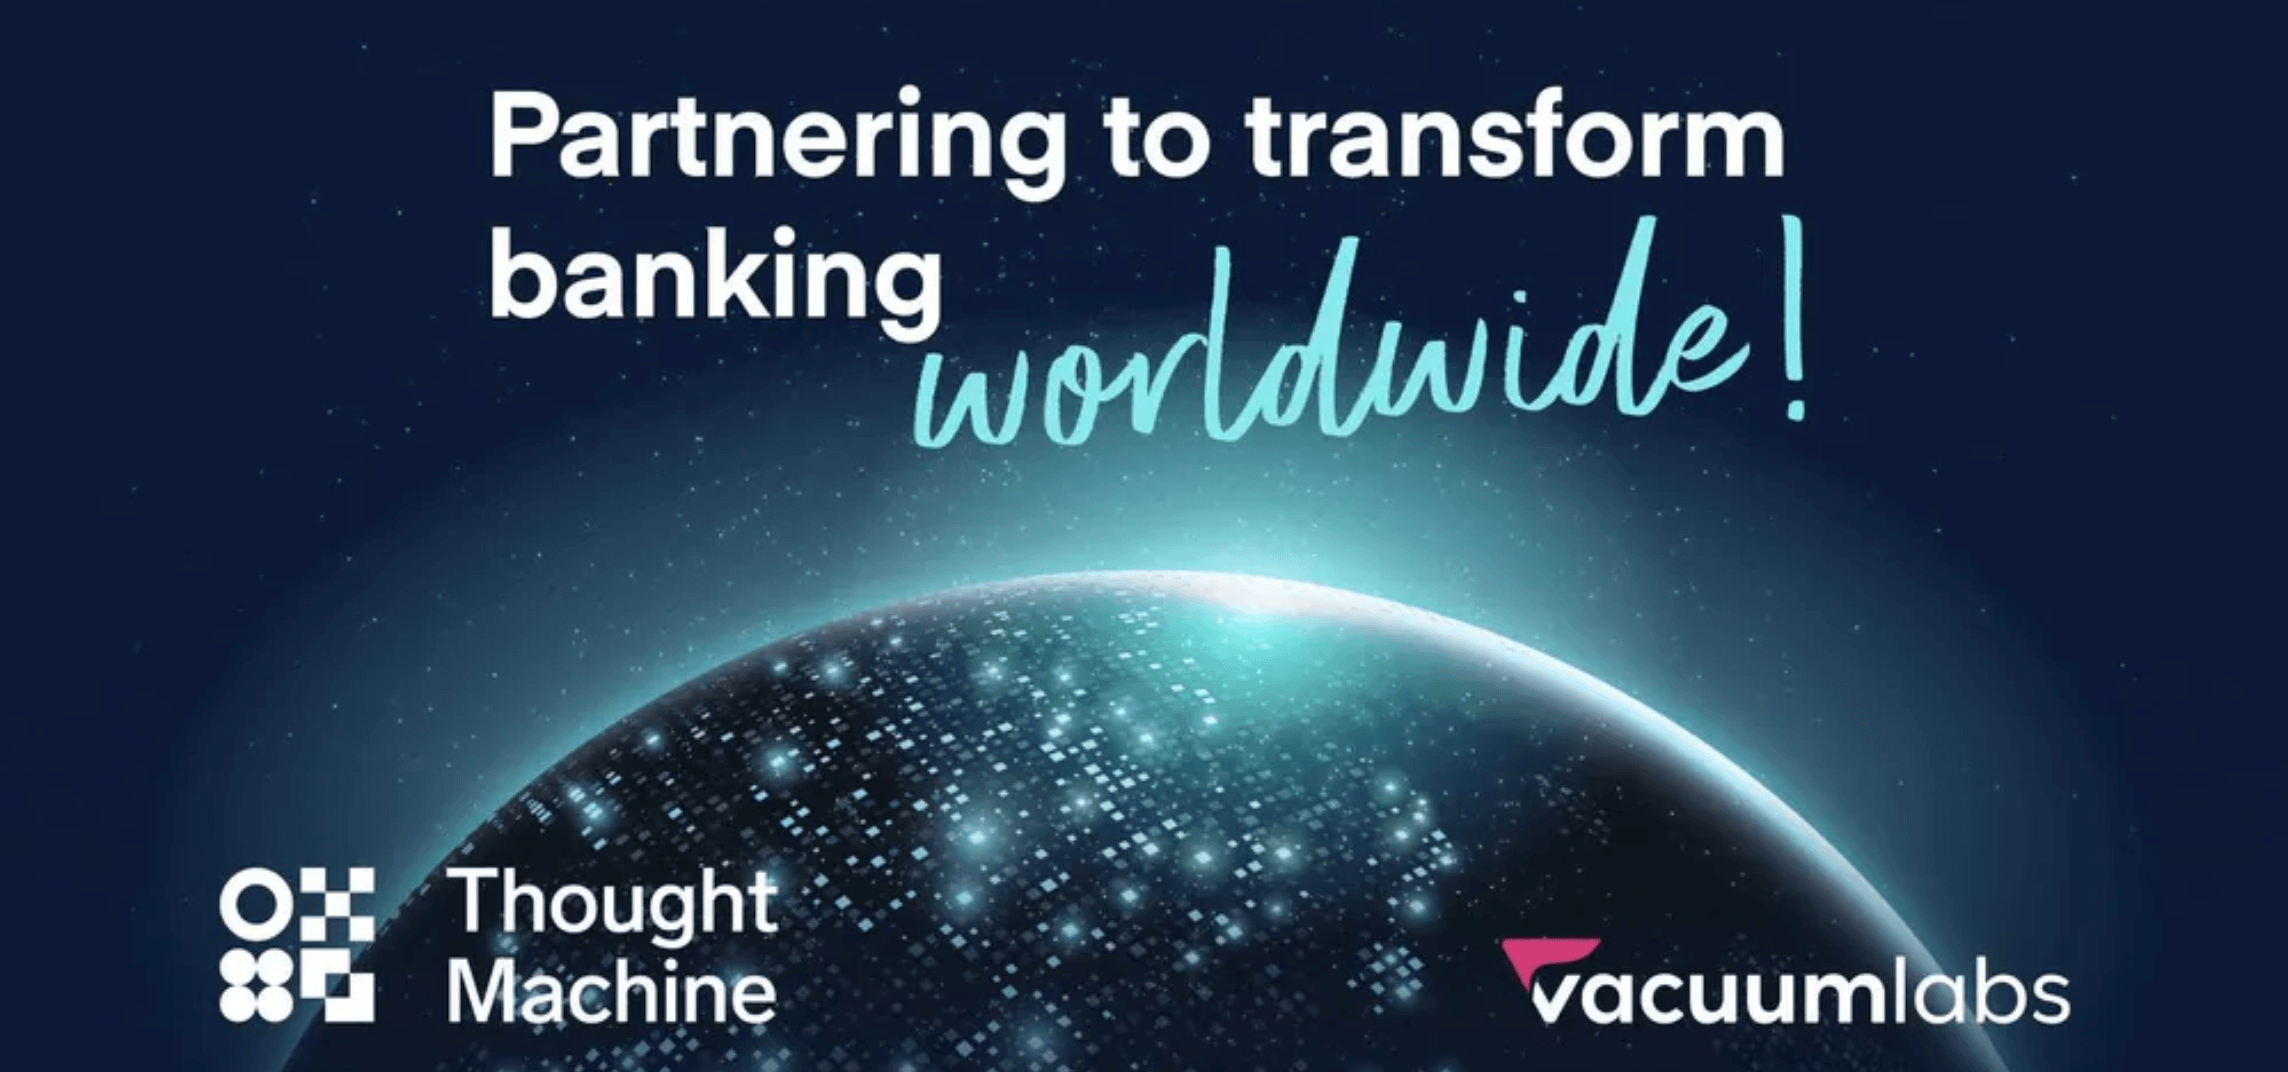 Vacuumlabs and Thought Machine partner to transform banking